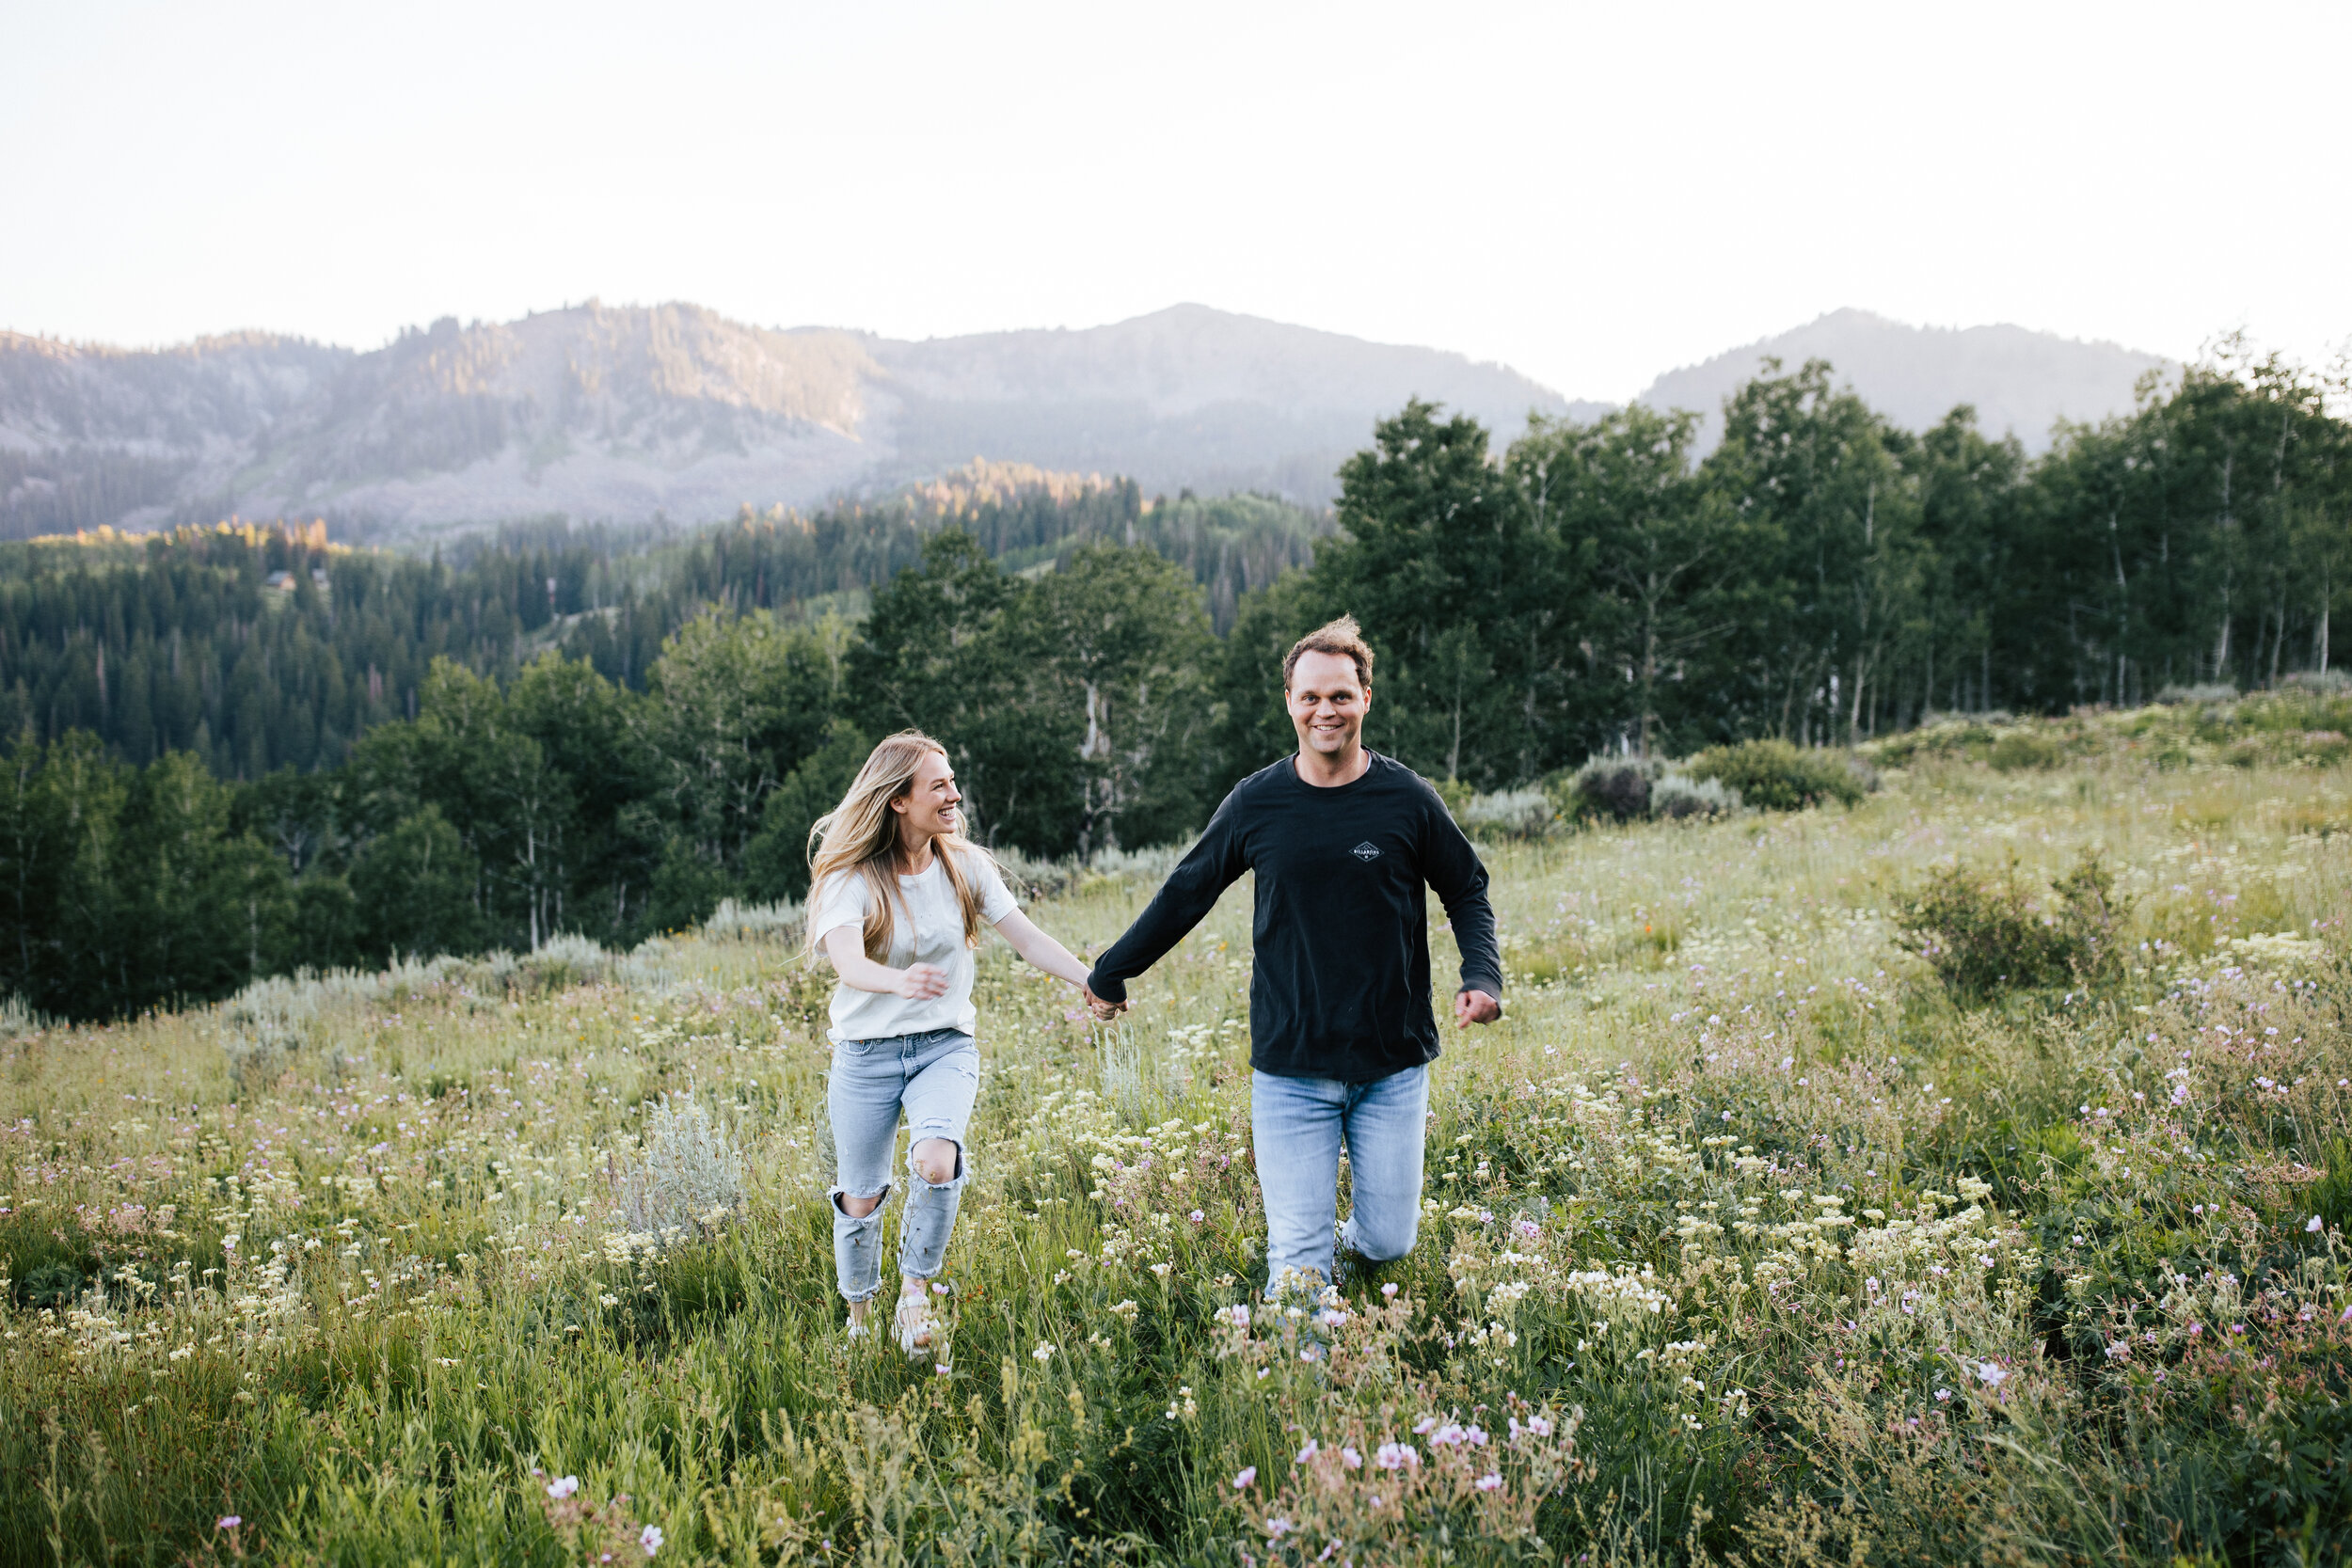  Engagement session in wildflowers in the mountains near Park City, Utah. Summertime engagement photos with mountain views. Engaged couple running around in the mountains. Outfit inspo. Engagement outfits. #engagementphotos #engagements #weddingphoto